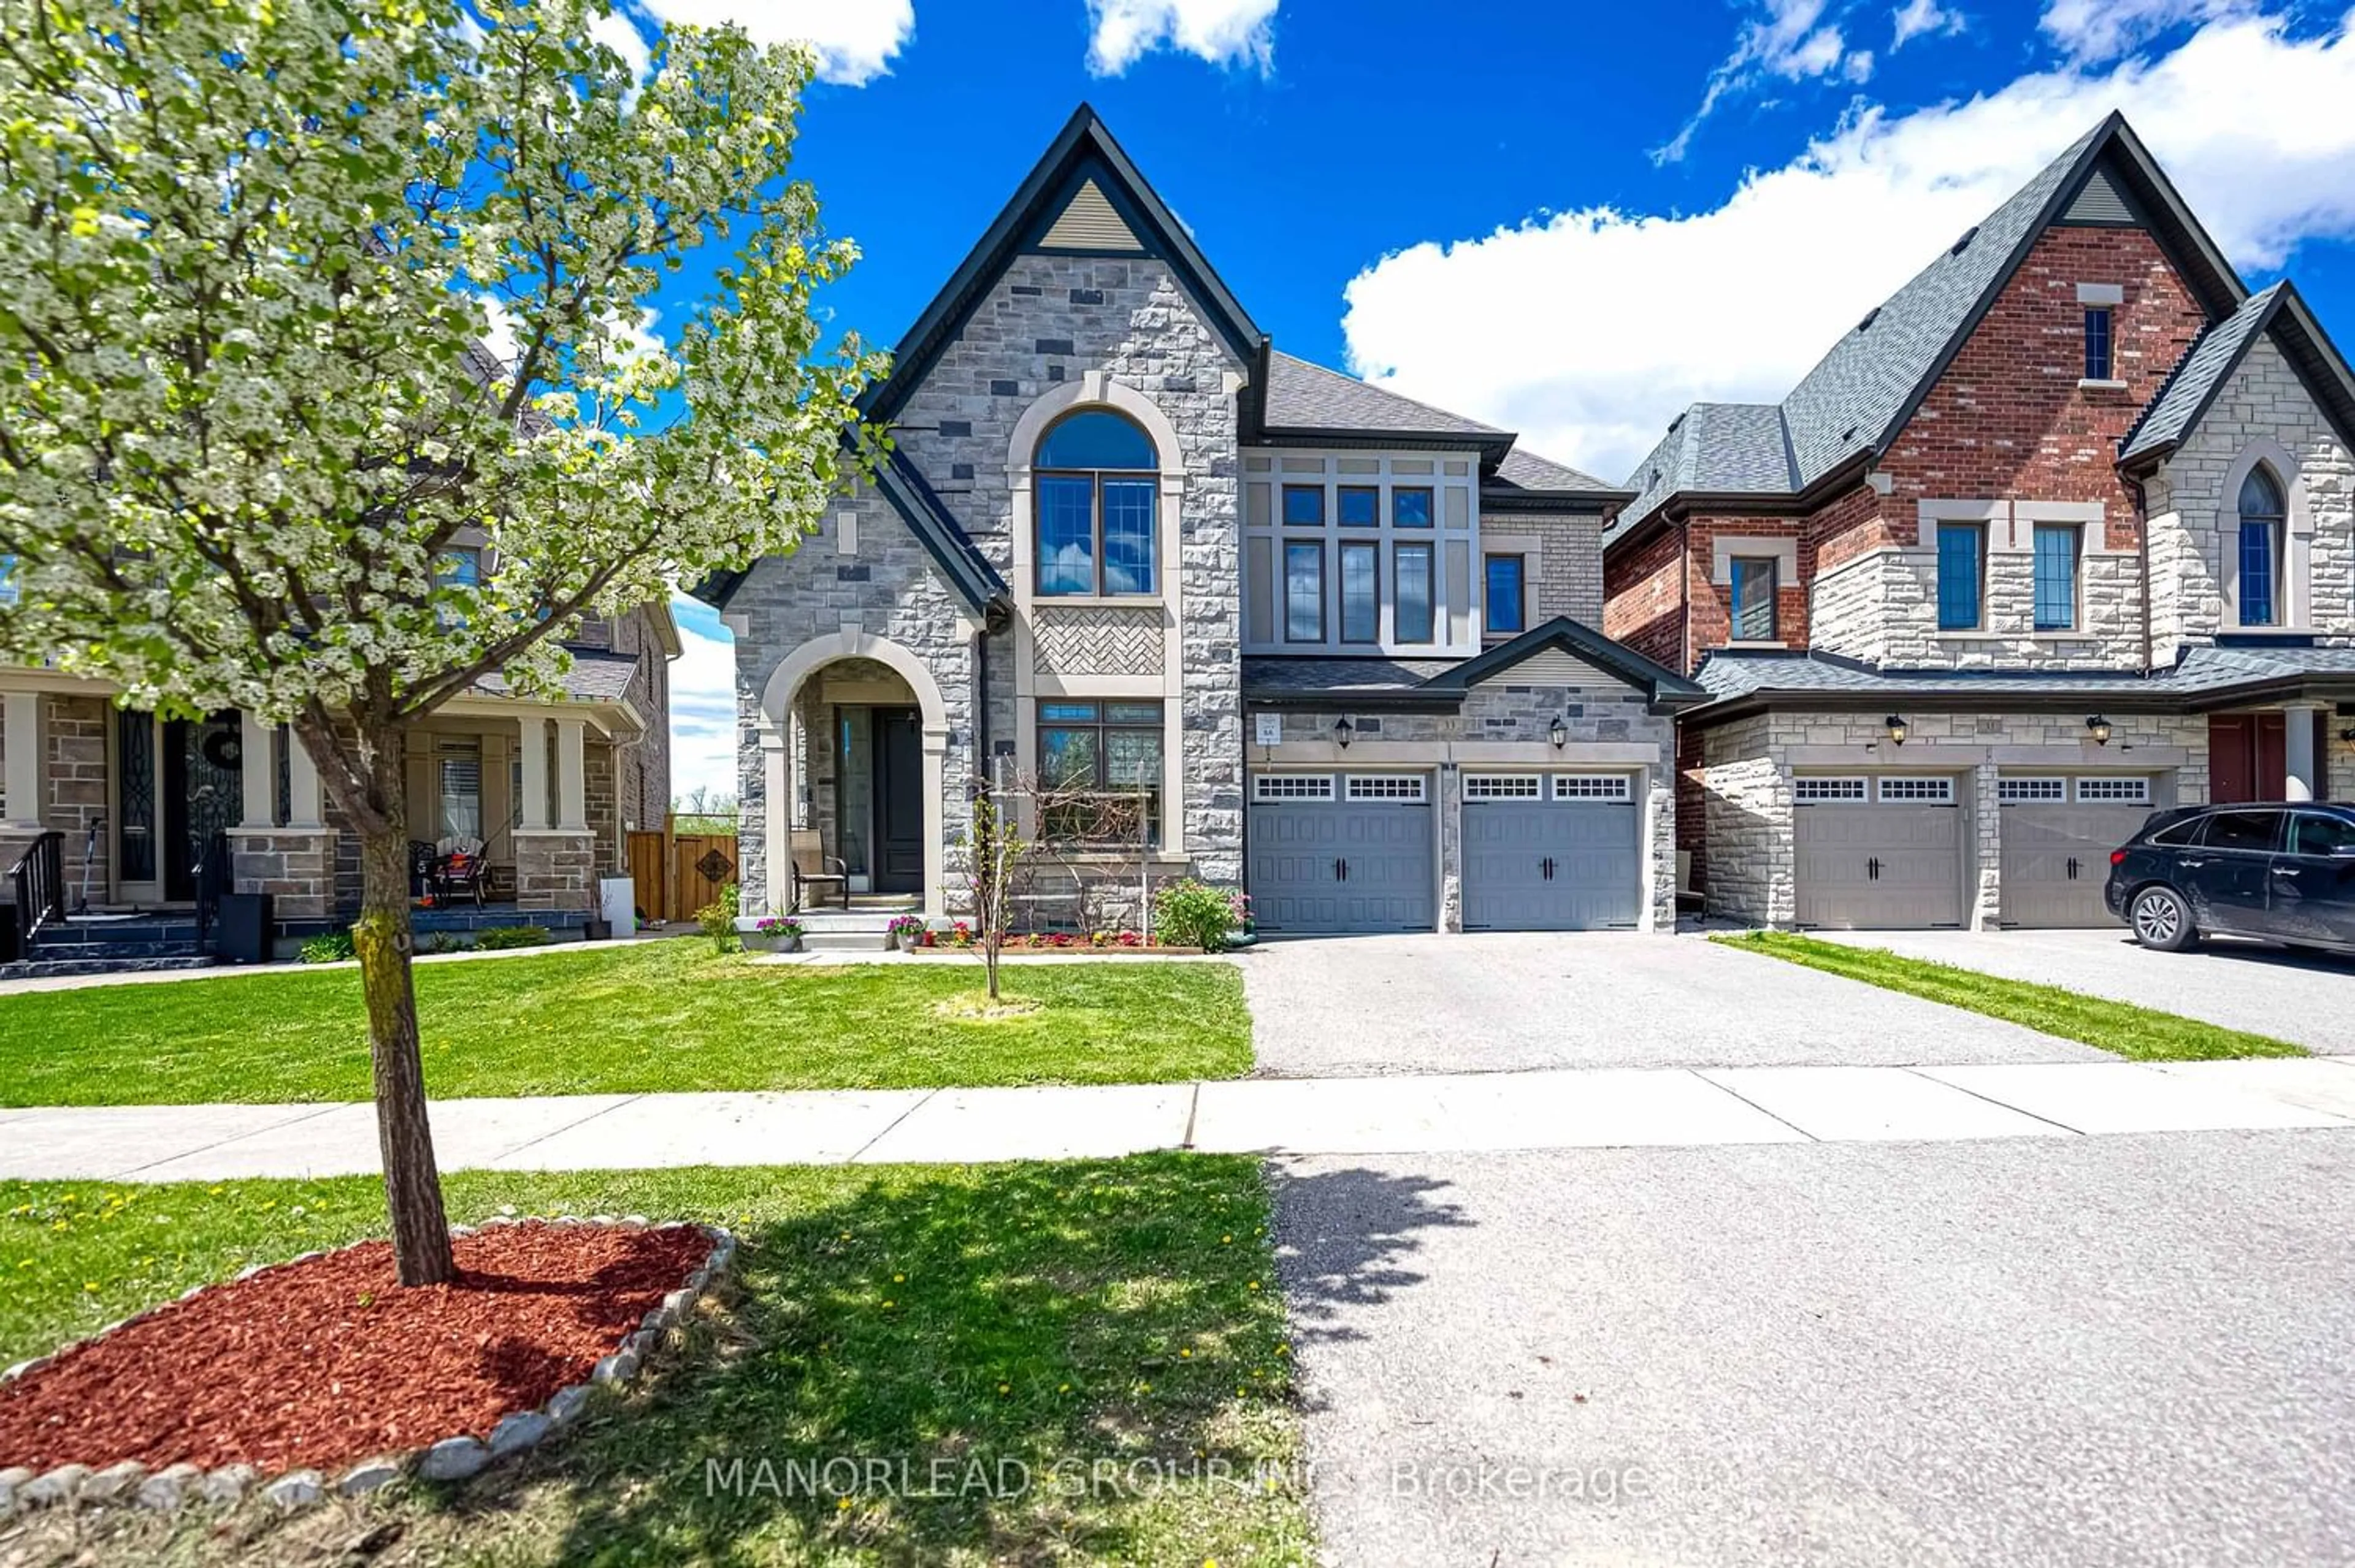 Home with brick exterior material for 33 Roy Harper Ave, Aurora Ontario L4G 7C4